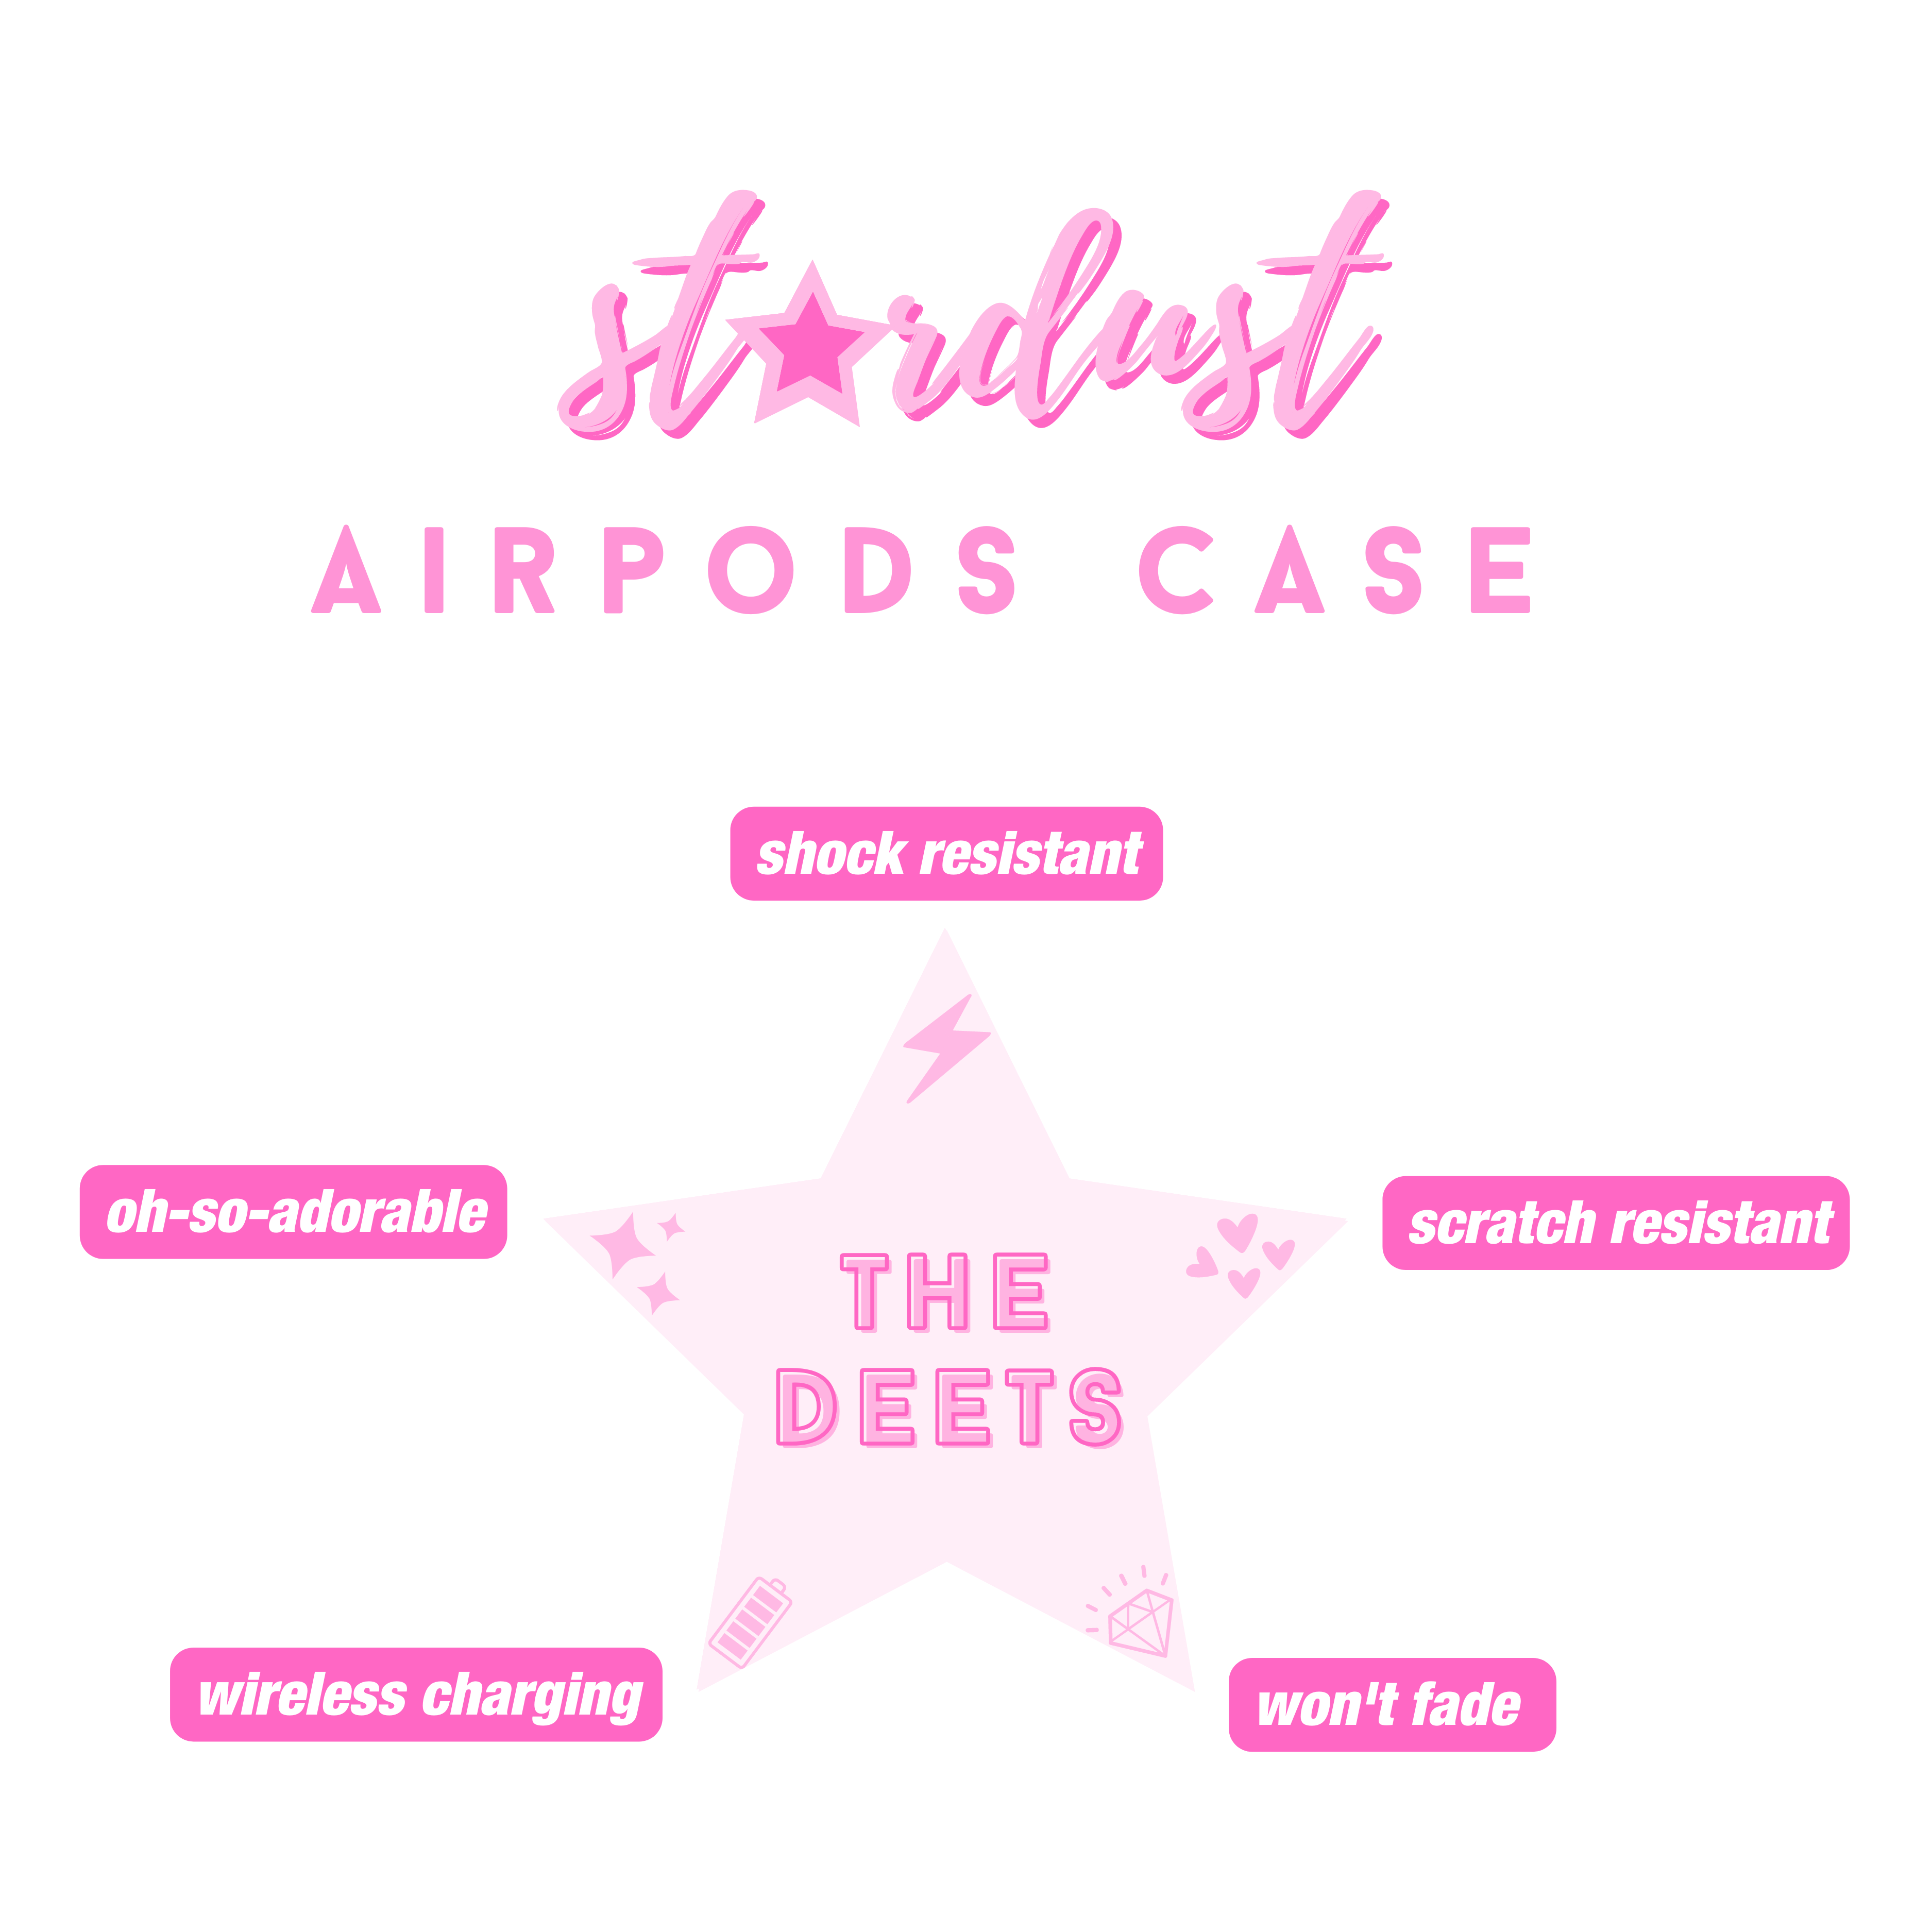 Groovy Gal AirPods Pro 2 Case